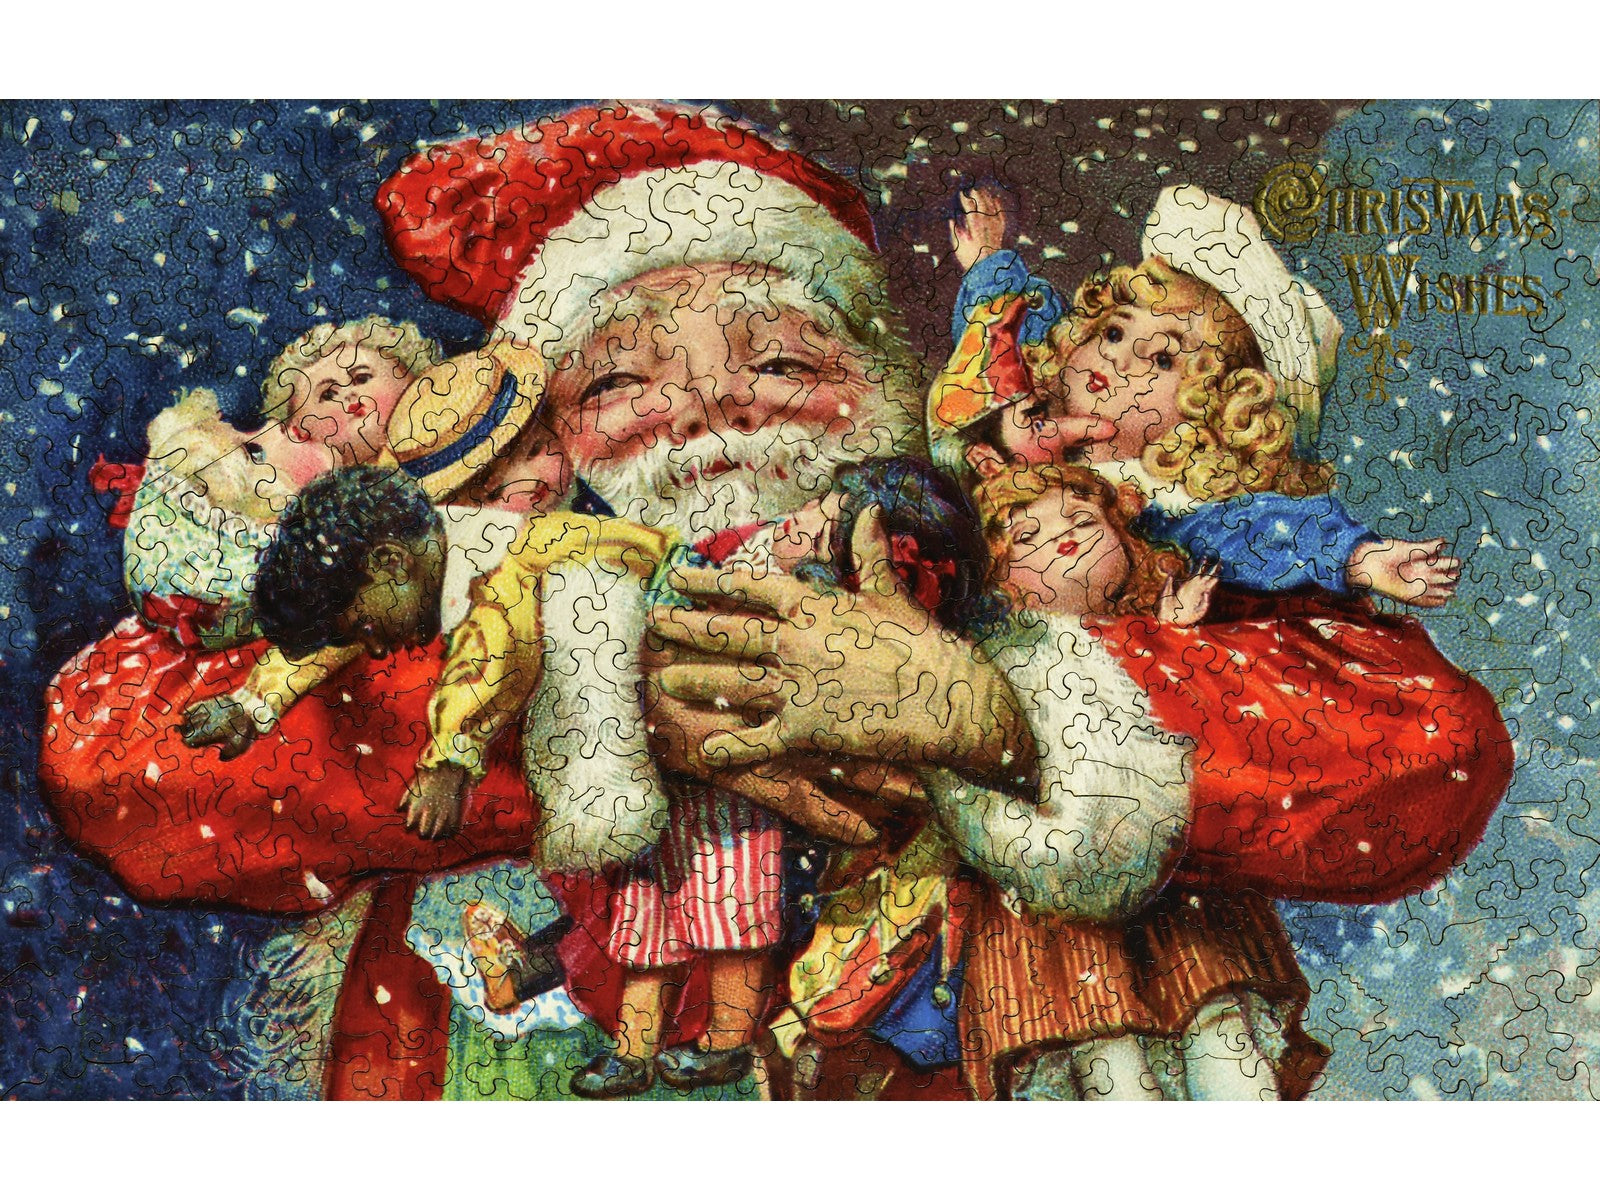 The front of the puzzle, Christmas Wishes, which shows Santa Claus holding an armful of dolls.